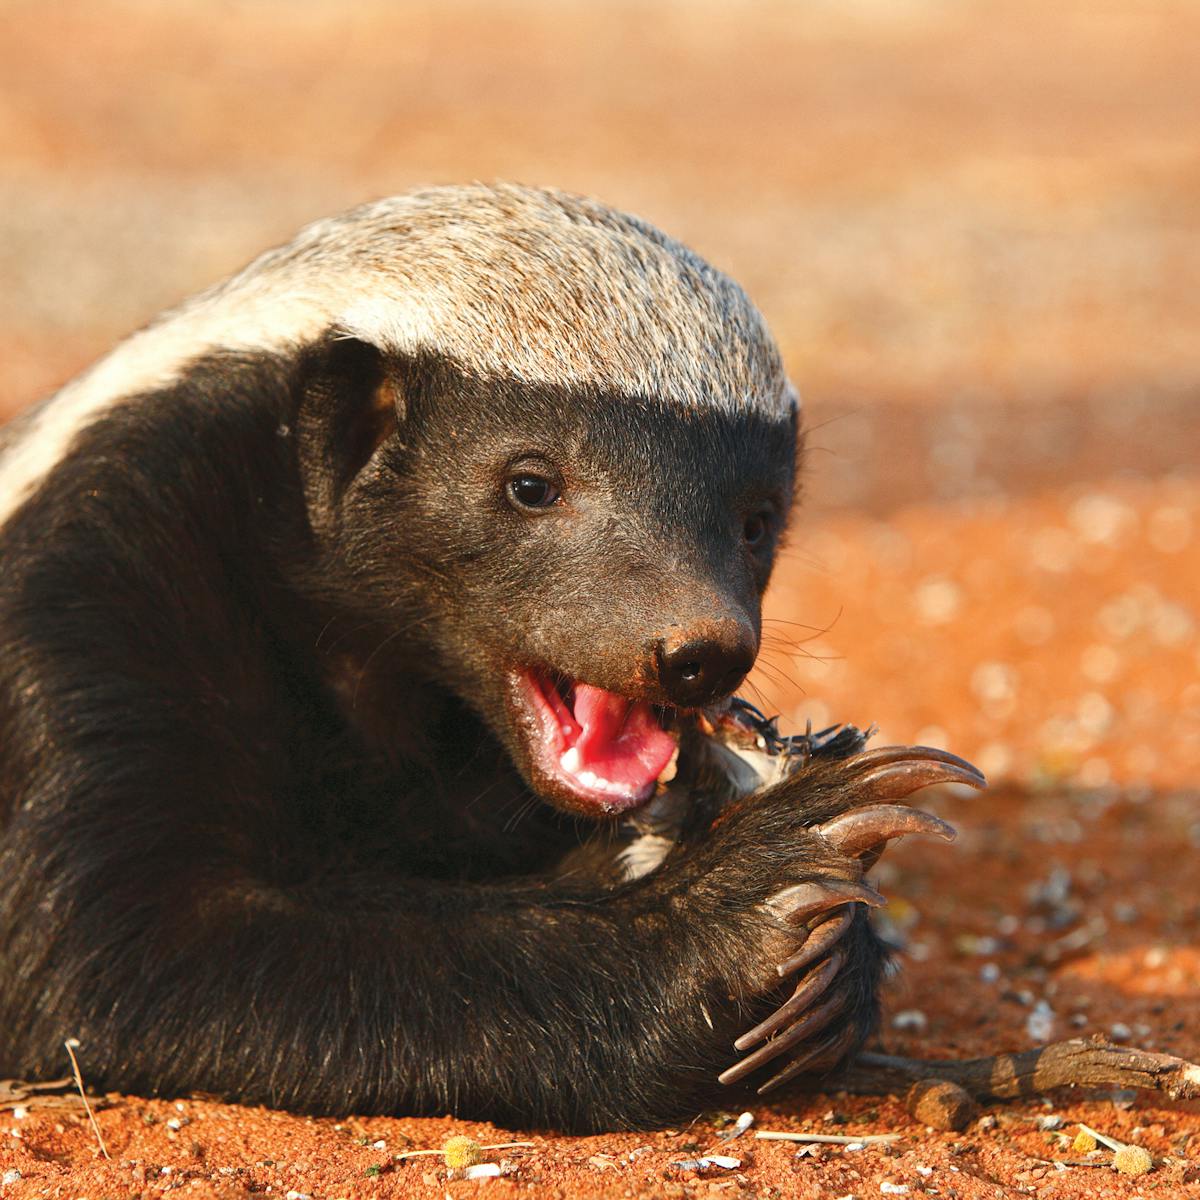 The 'Houdini' honey badger ... and other surprisingly clever animals